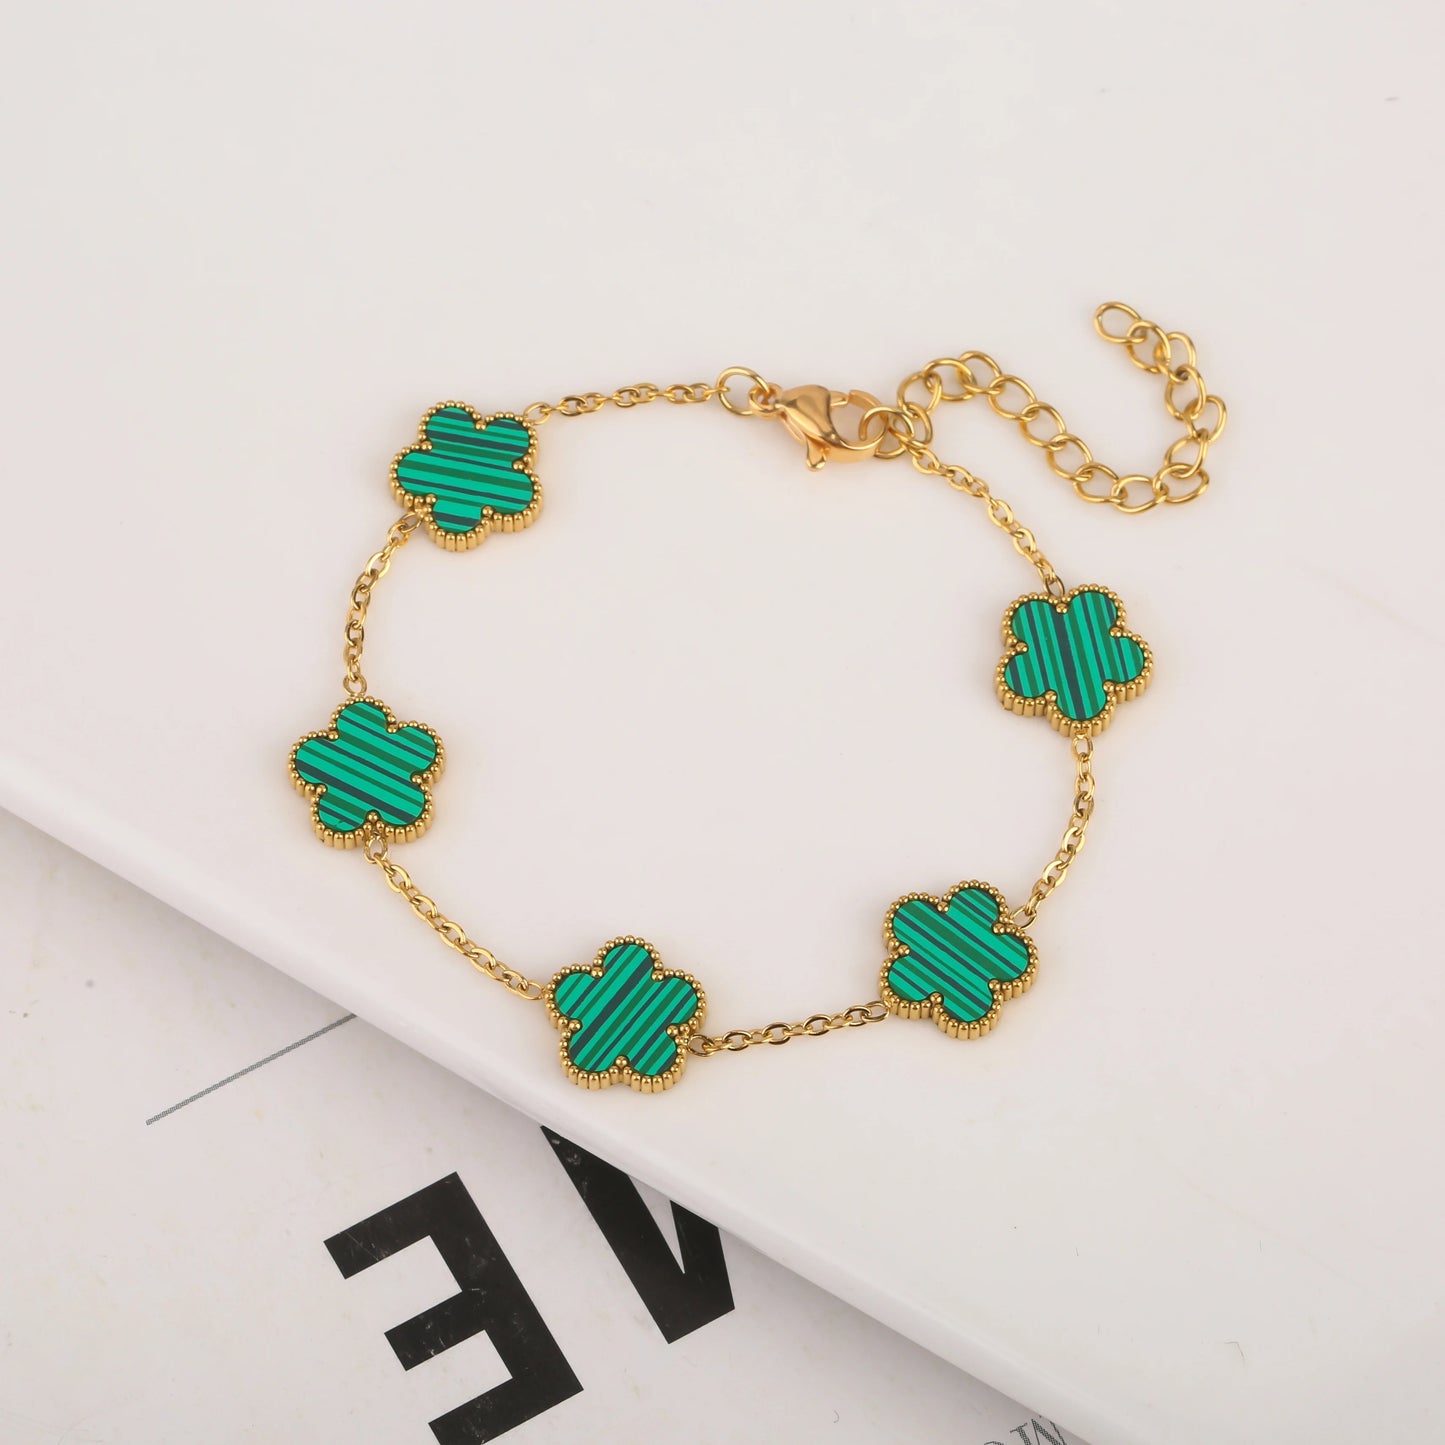 Gorgeous Belle Clover Leaf Necklace, Earrings and Bangle Set